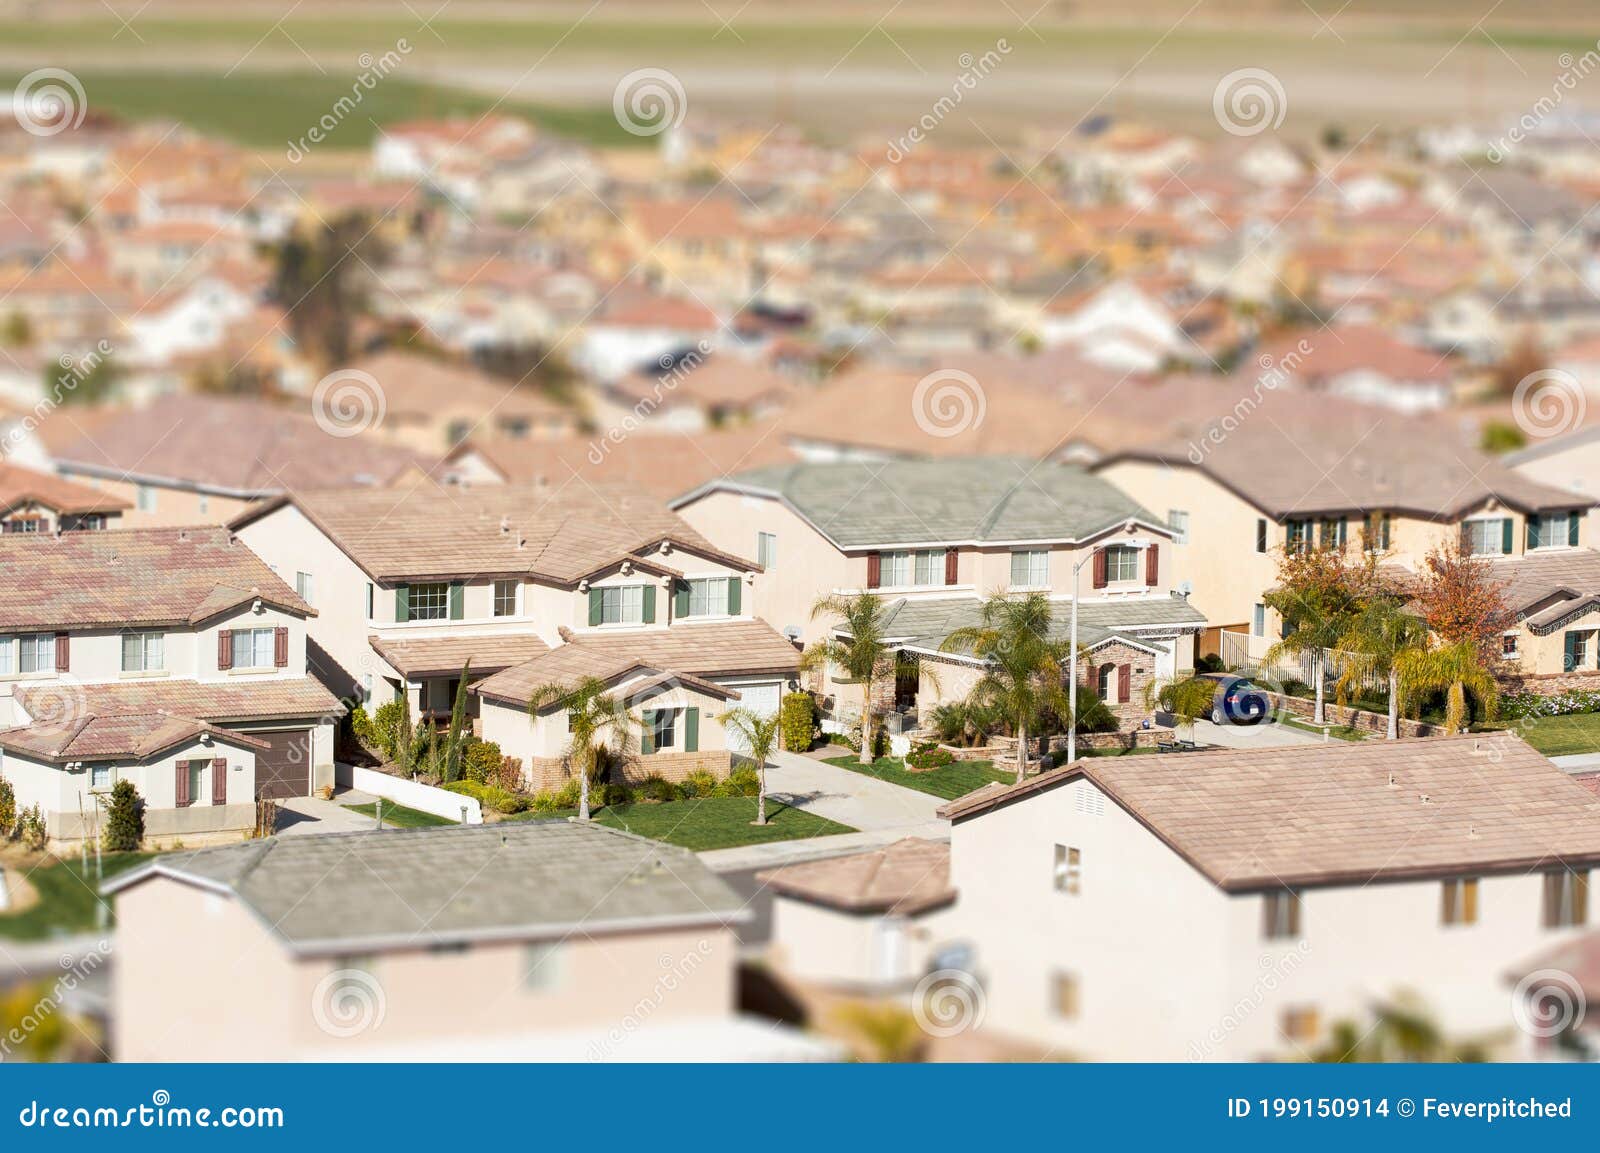 aerial view of populated neigborhood of houses with tilt-shift blur